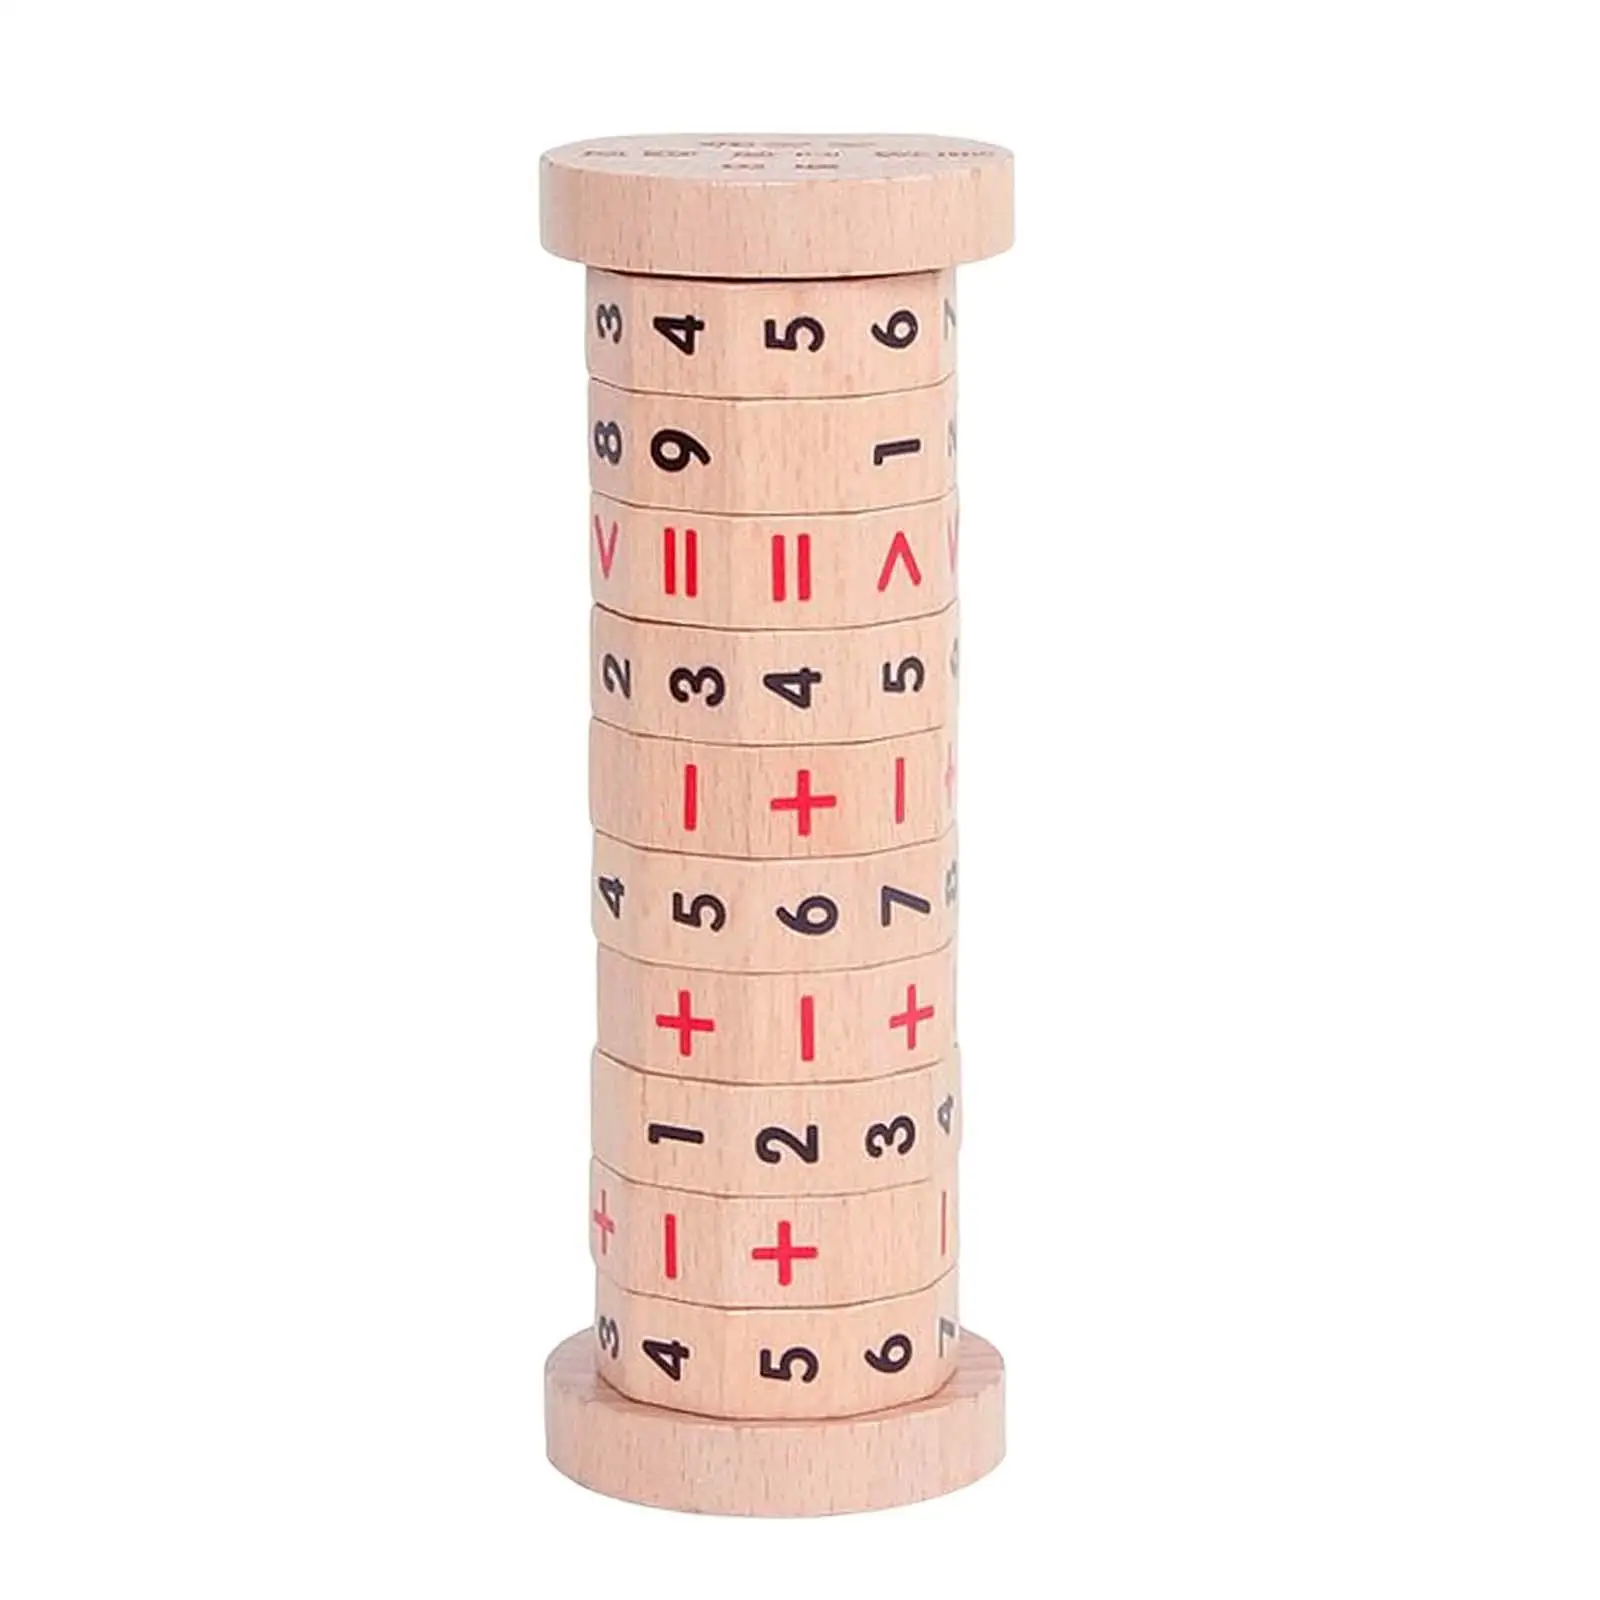 Montessori Wooden Rotating Cylinder Block Learning Toy Cylinder Numbers Toys Symbols Educational Arithmetic DIY for Children